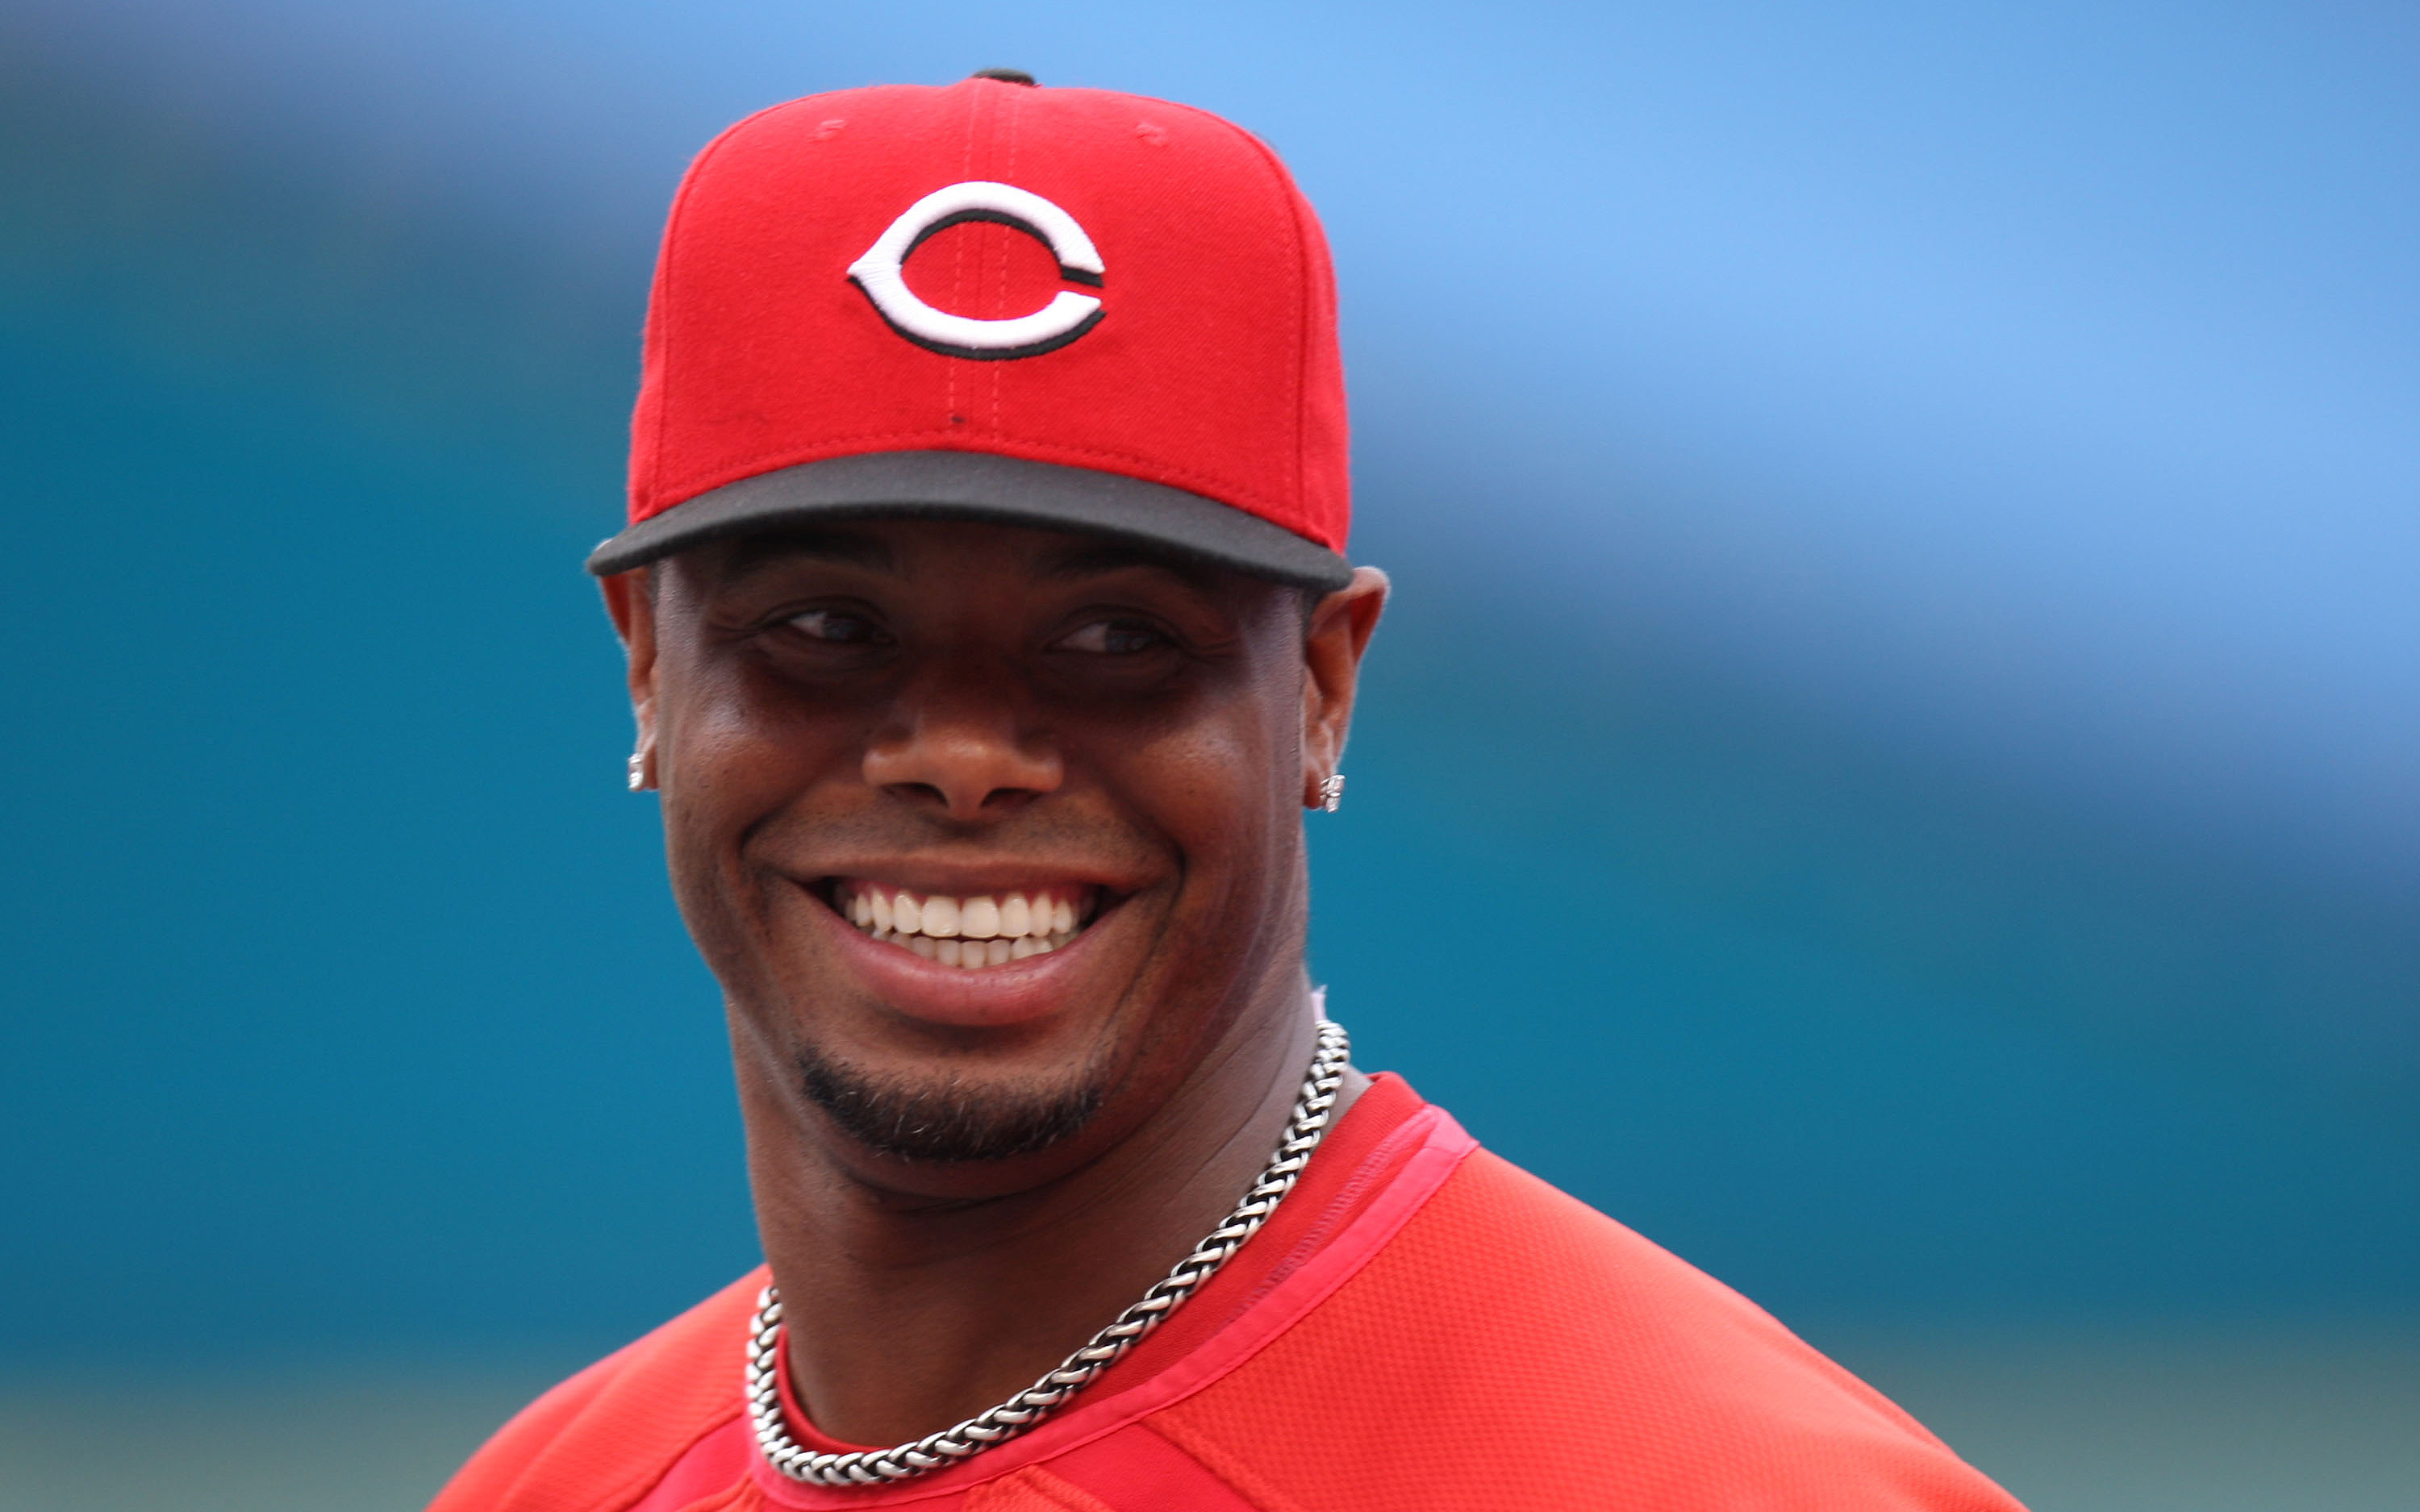 Re-evaluating Ken Griffey, Jr.'s place in Reds history